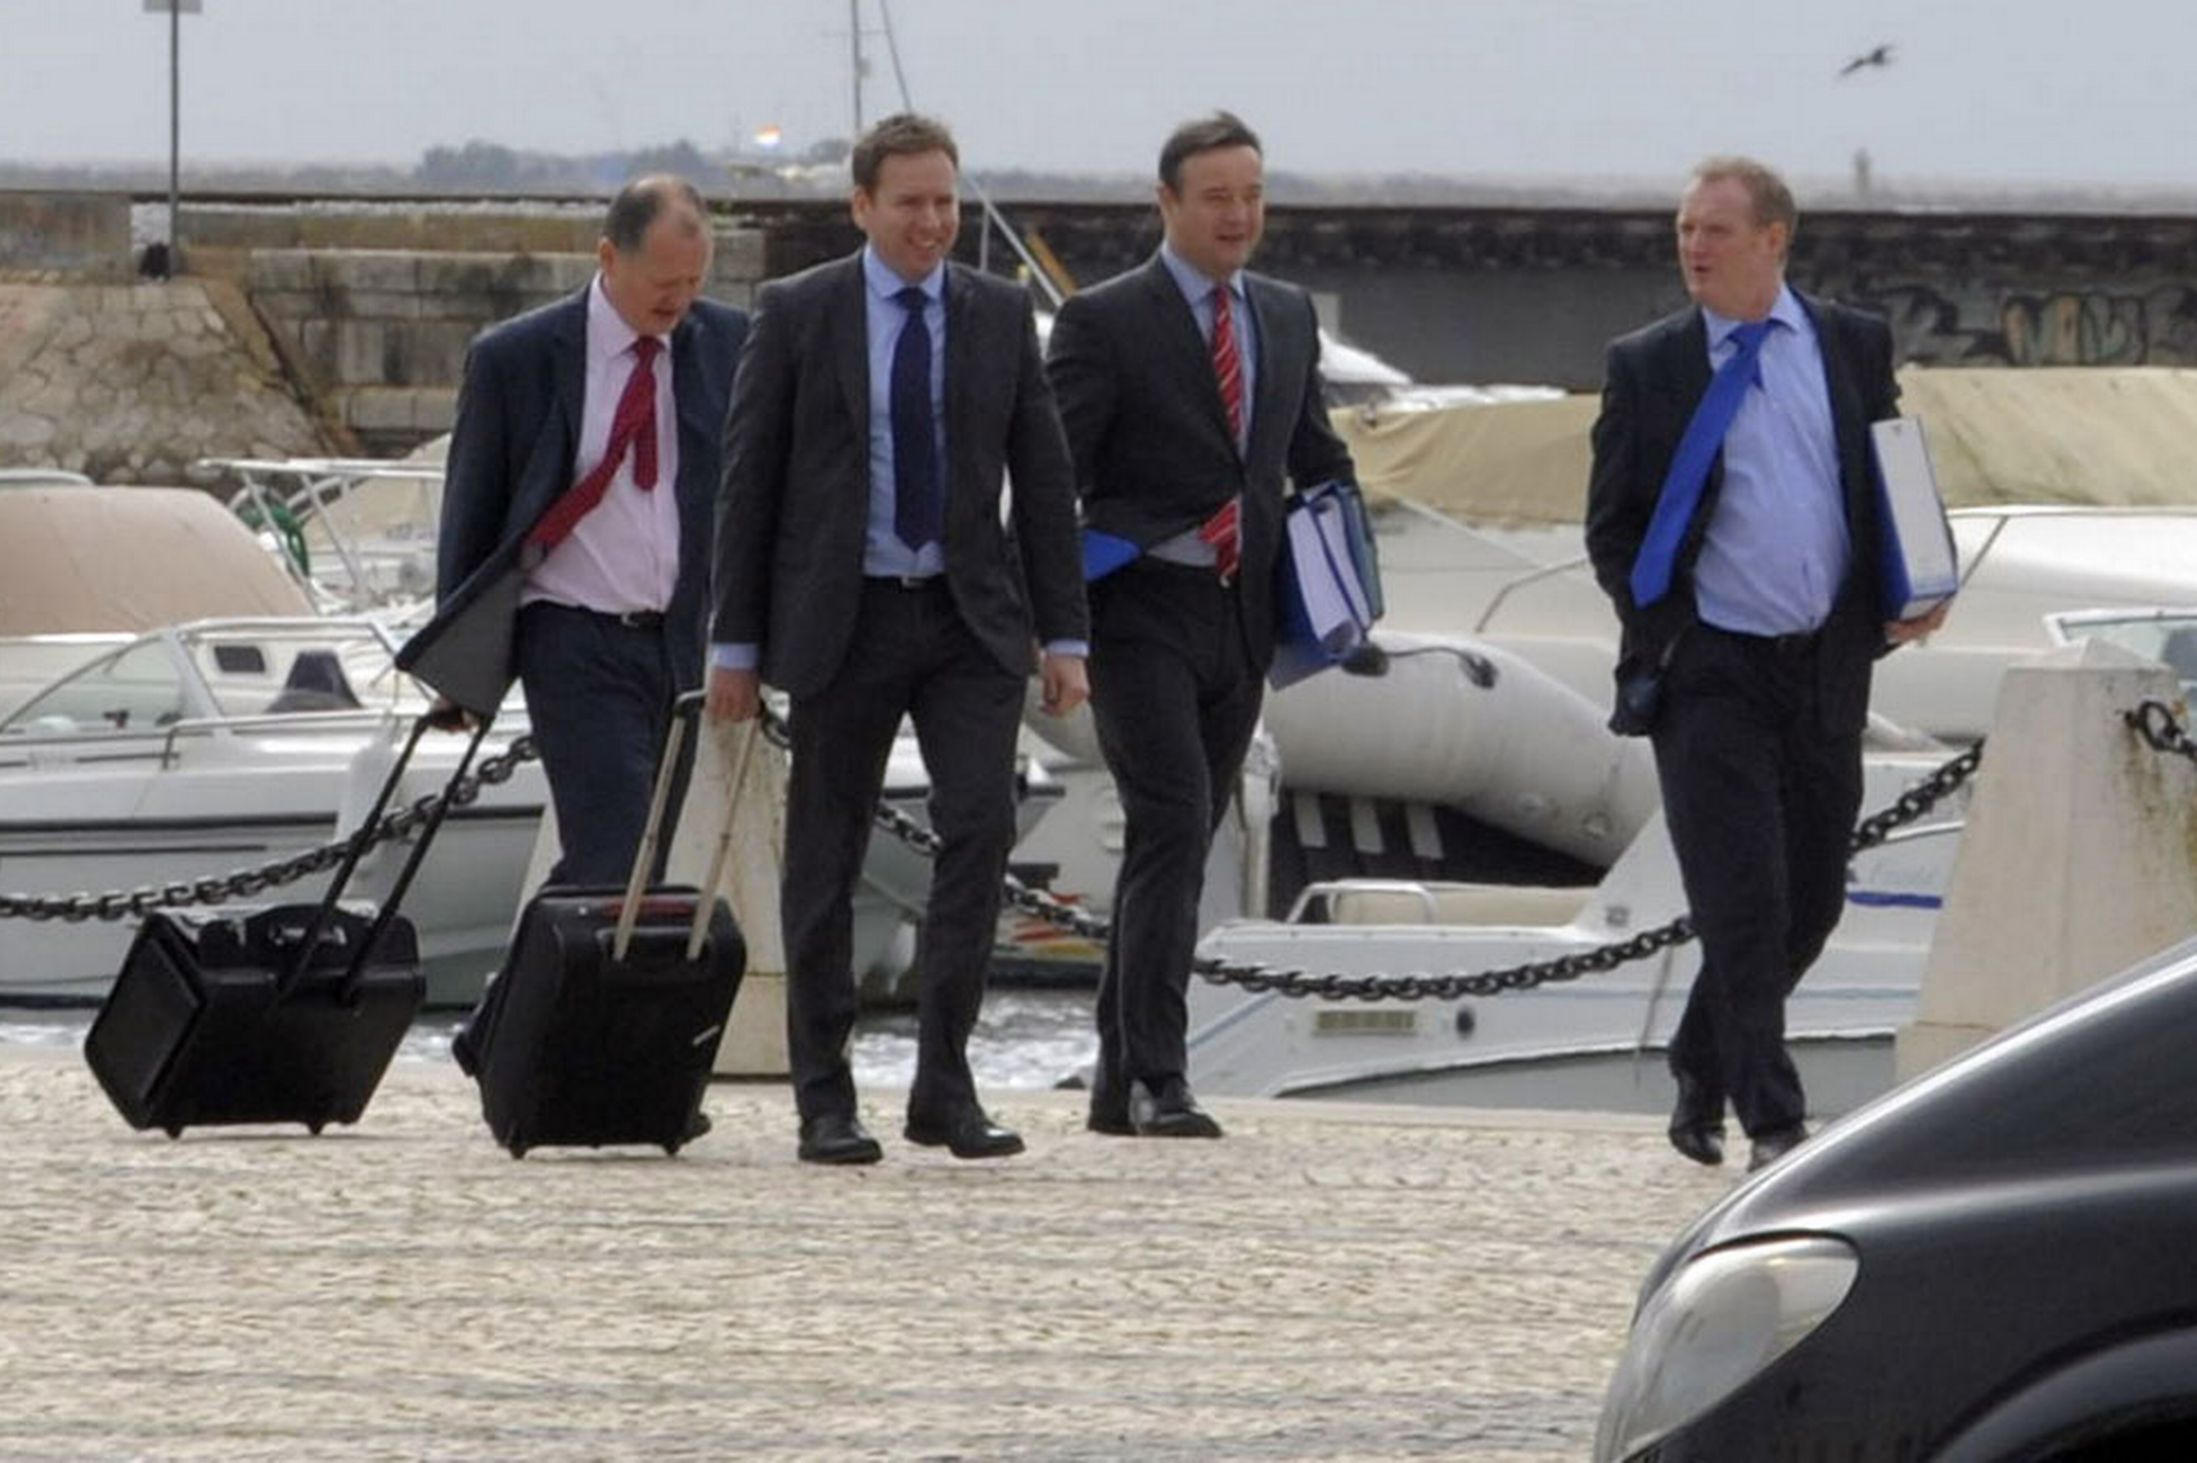 Four British Police officers from Scotland Yard, including DCI Andy Redwood, arrive in downtown Faro carrying documents believed to be relating to the arrest of 3 men in connection with the Madeline McCann case